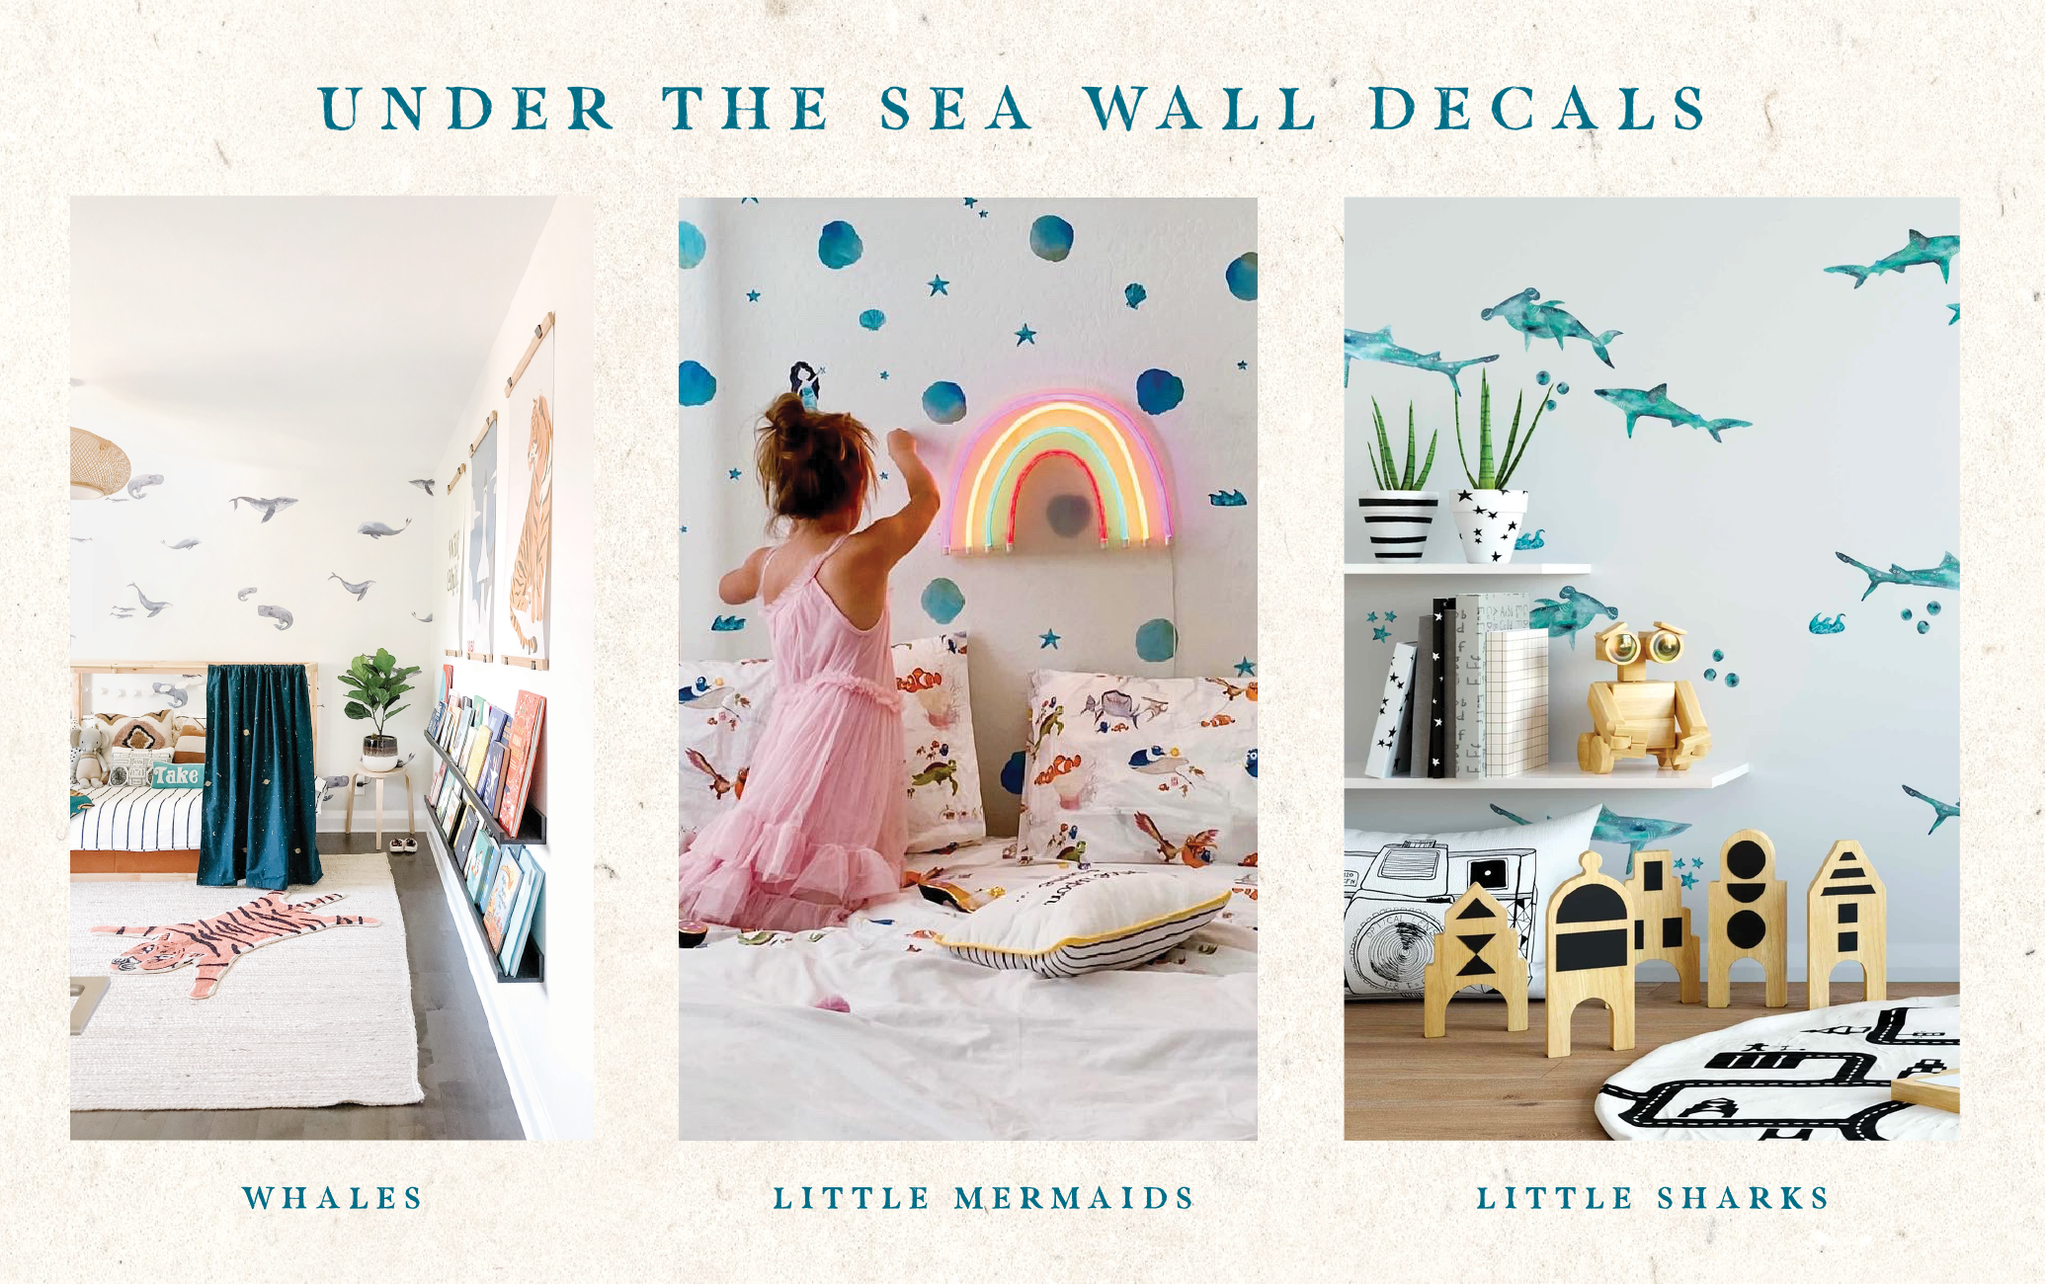 Under the sea wall decals